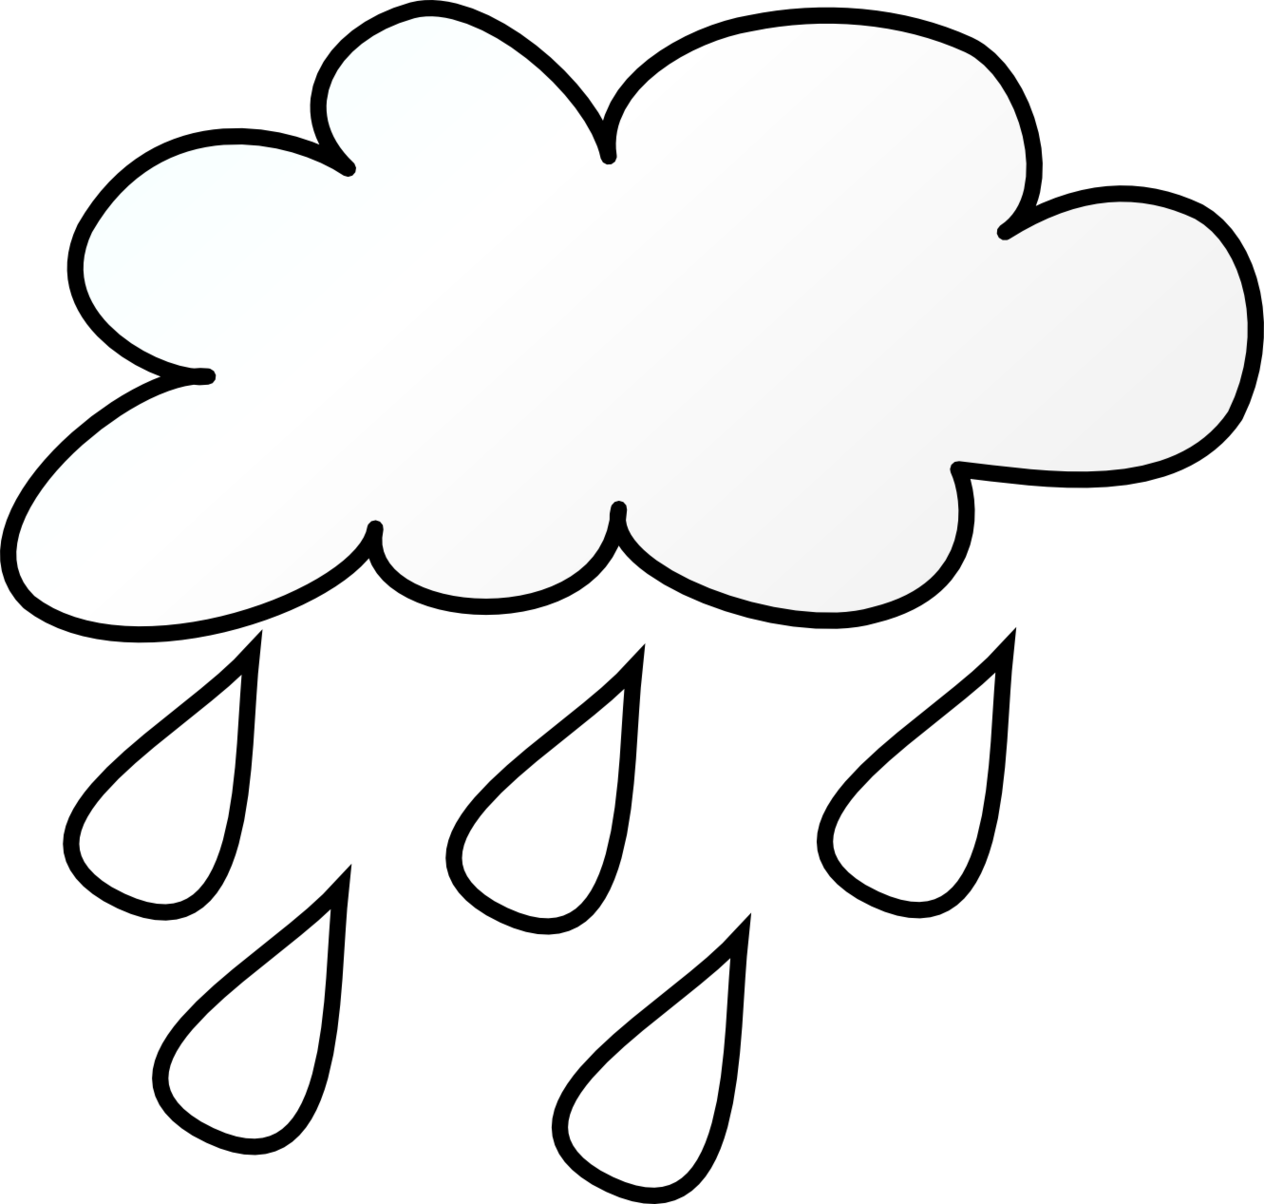 Weather Forecasting Cloud Clip Art - Weather Forecasting Cloud Clip Art (1264x1204)